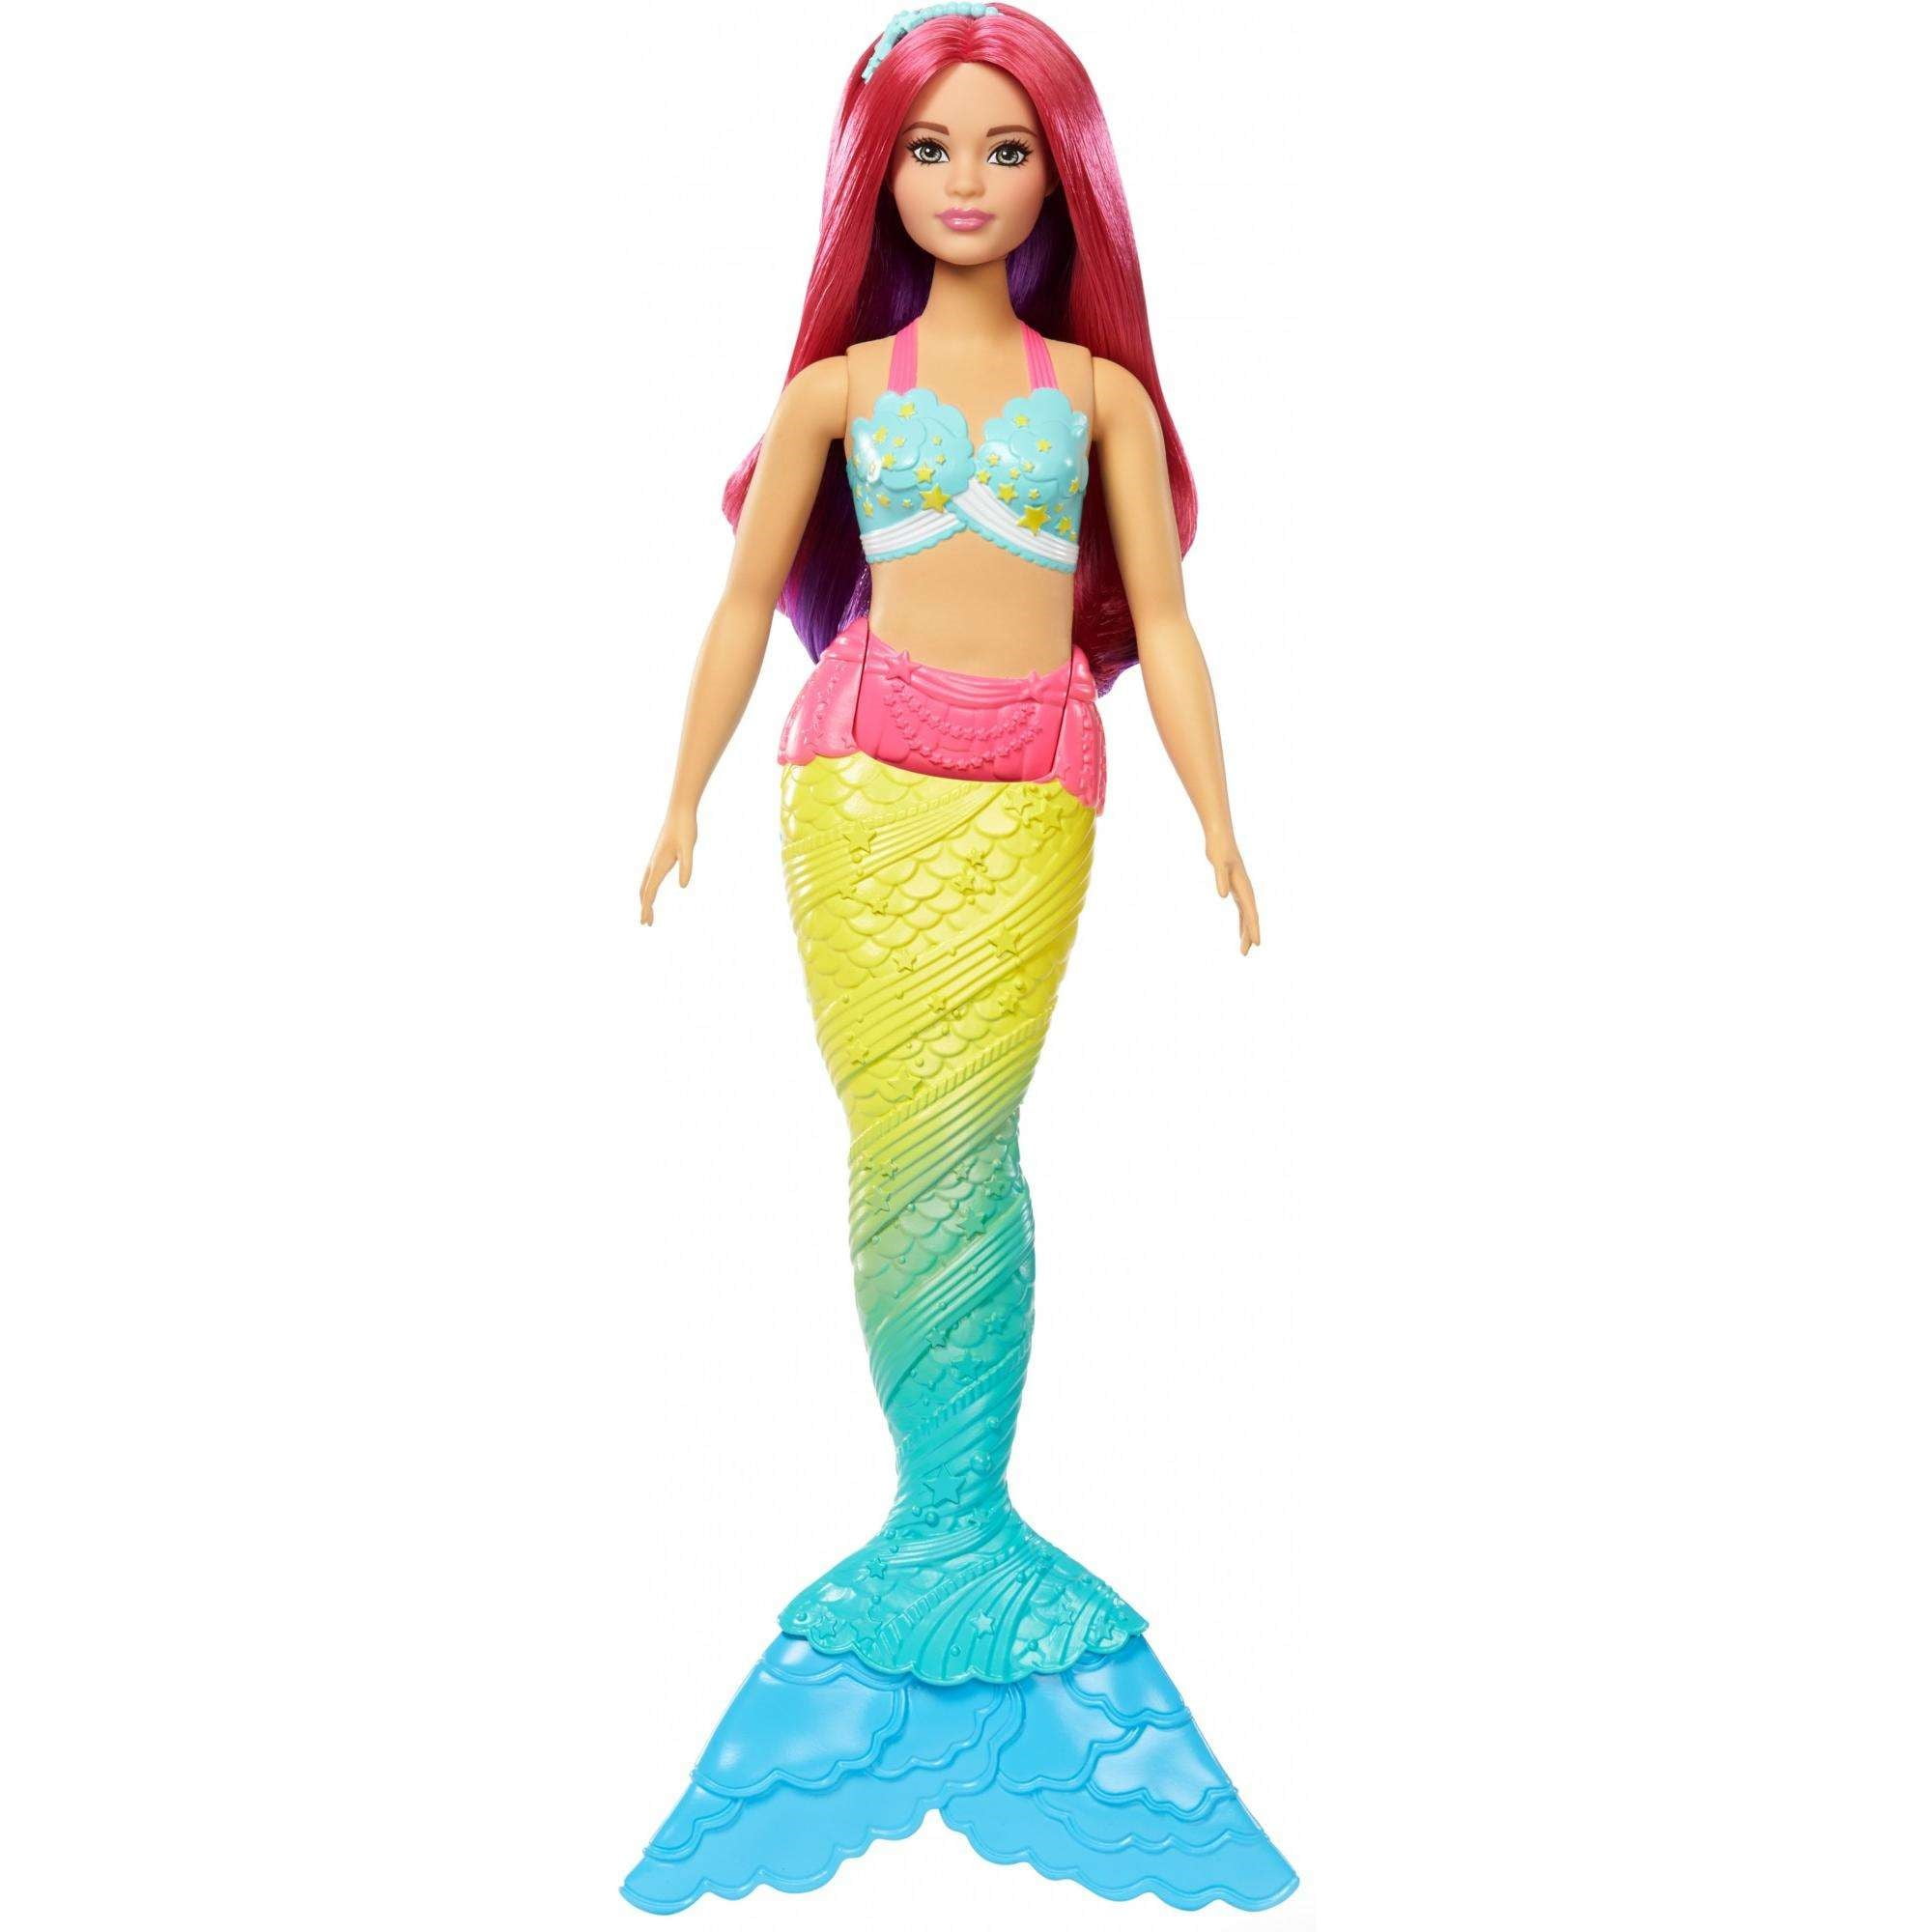 hostage adopt spectrum Barbie Dreamtopia Mermaid Doll with Red Hair & Rainbow-Colored Tail -  Walmart.com